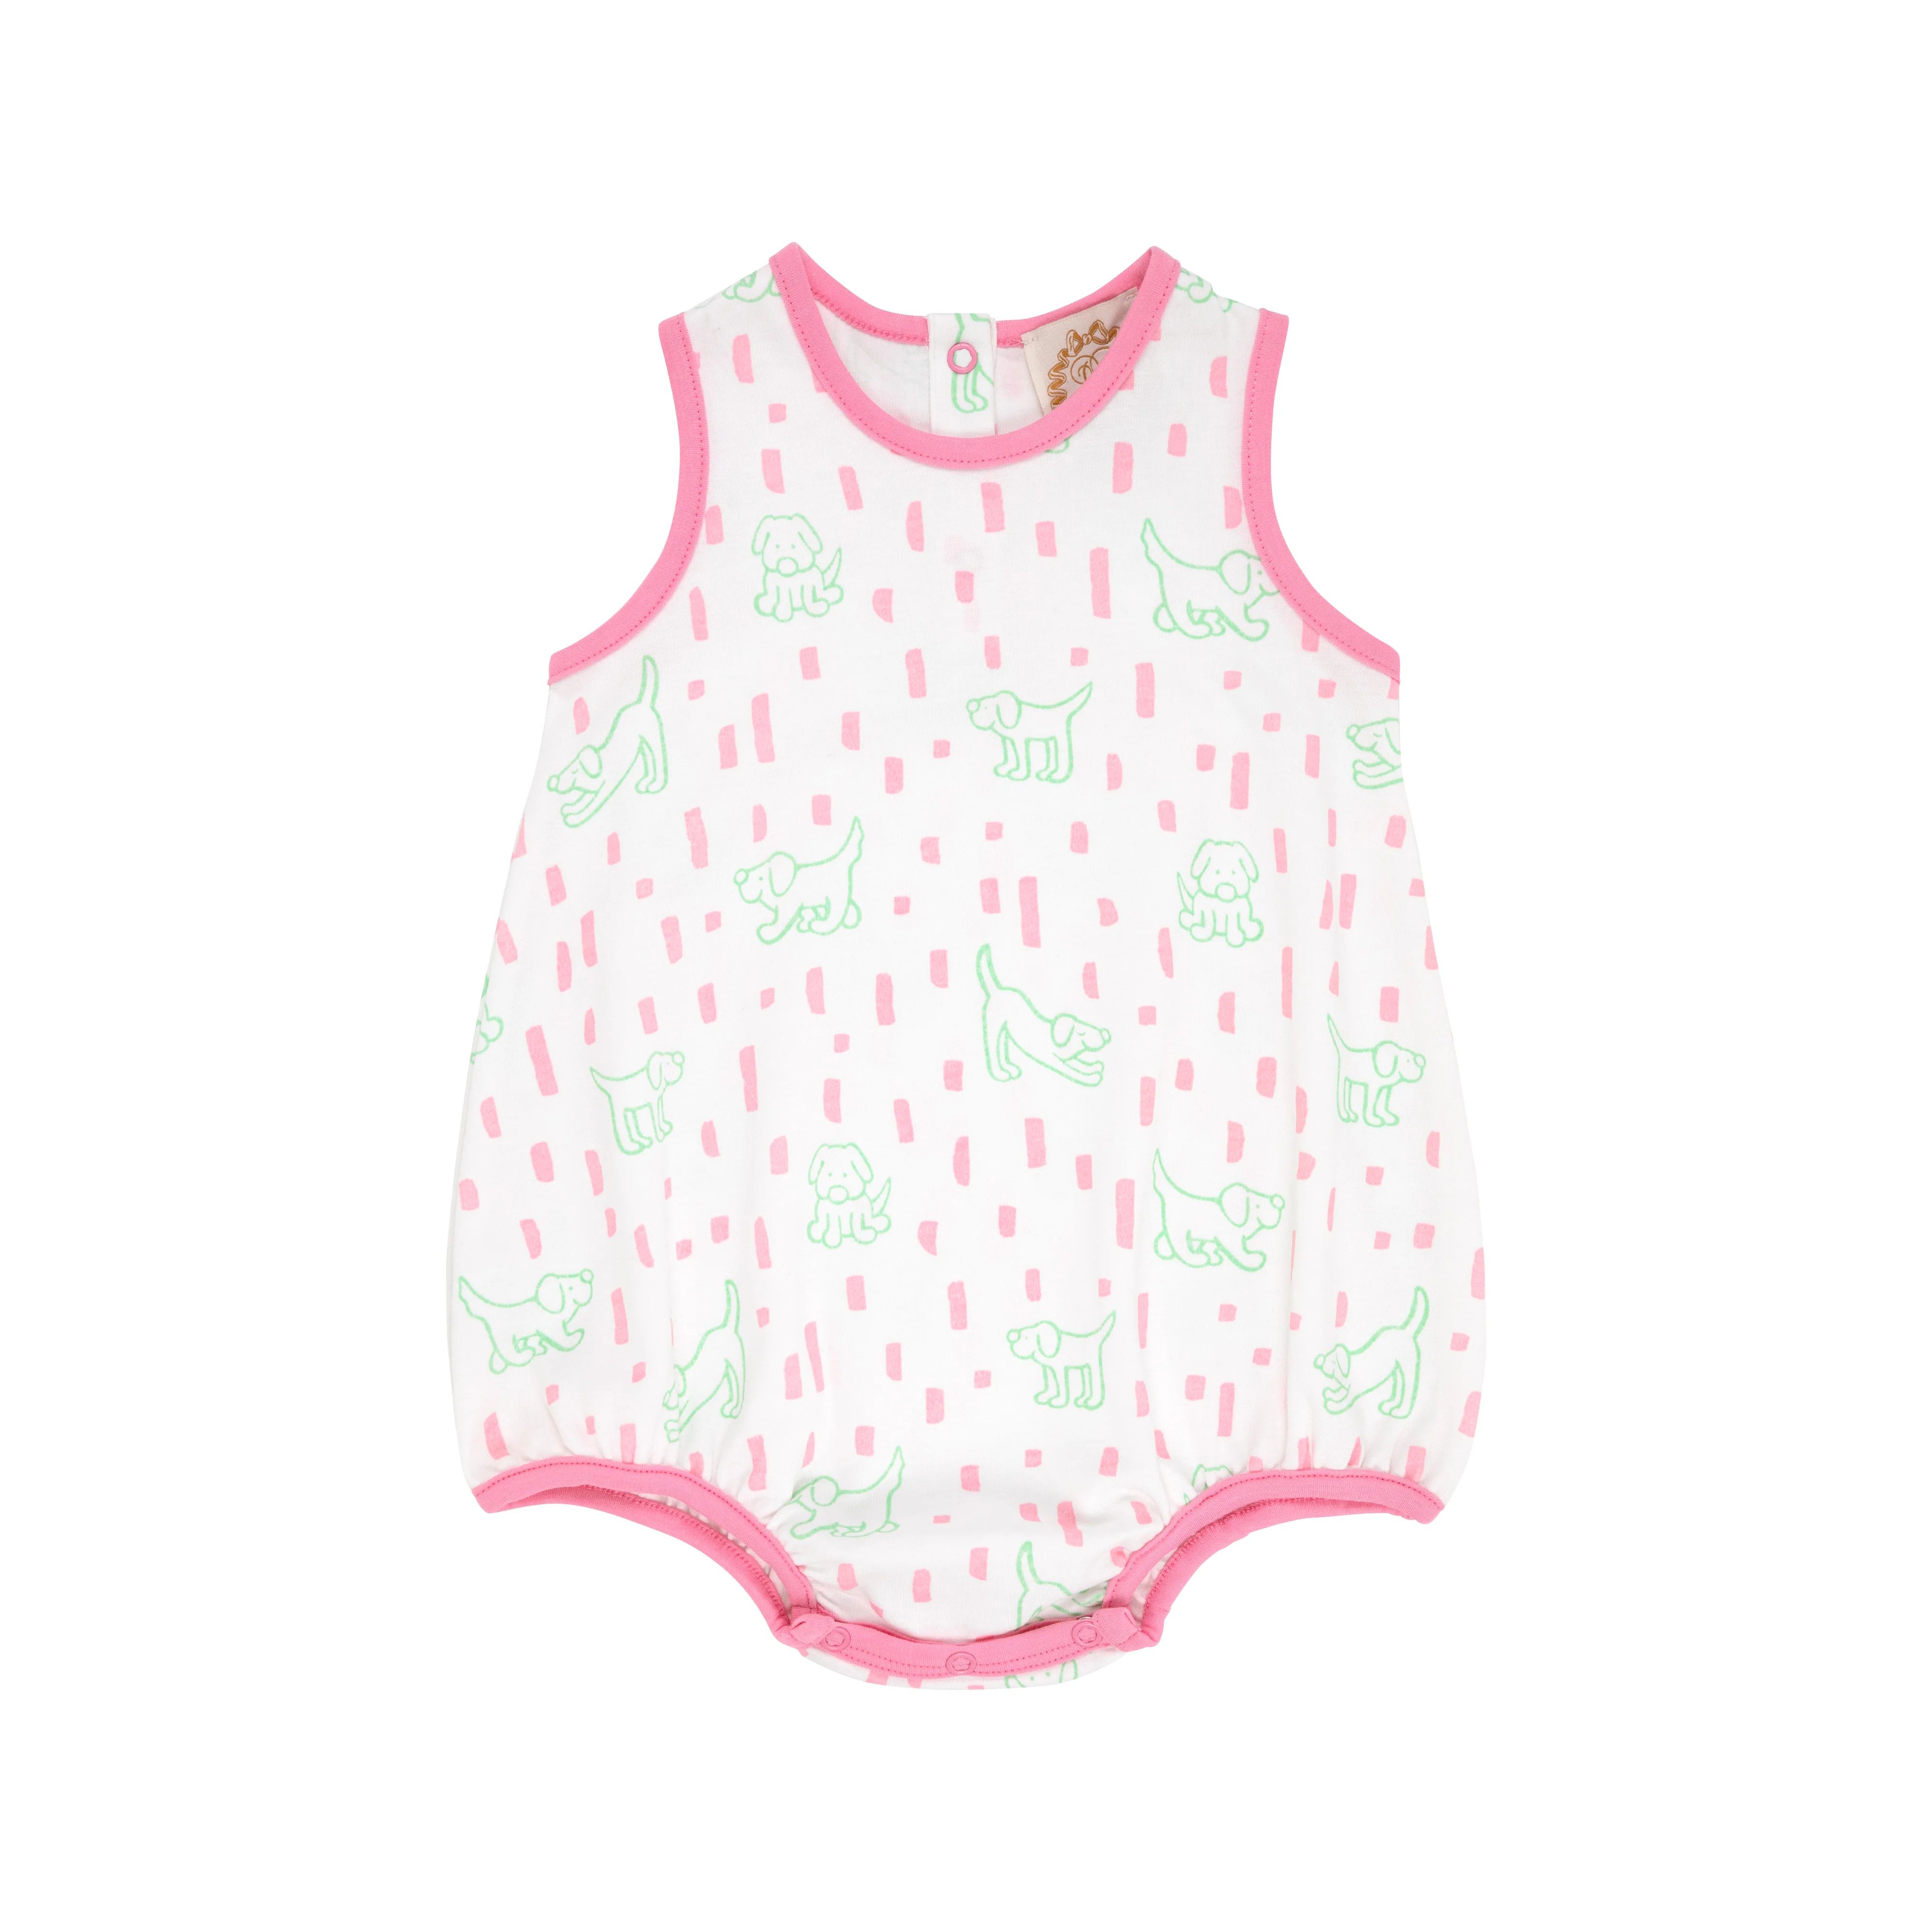 Patton Play Bubble - Puppy Paw-ty with Hamptons Hot Pink | The Beaufort Bonnet Company